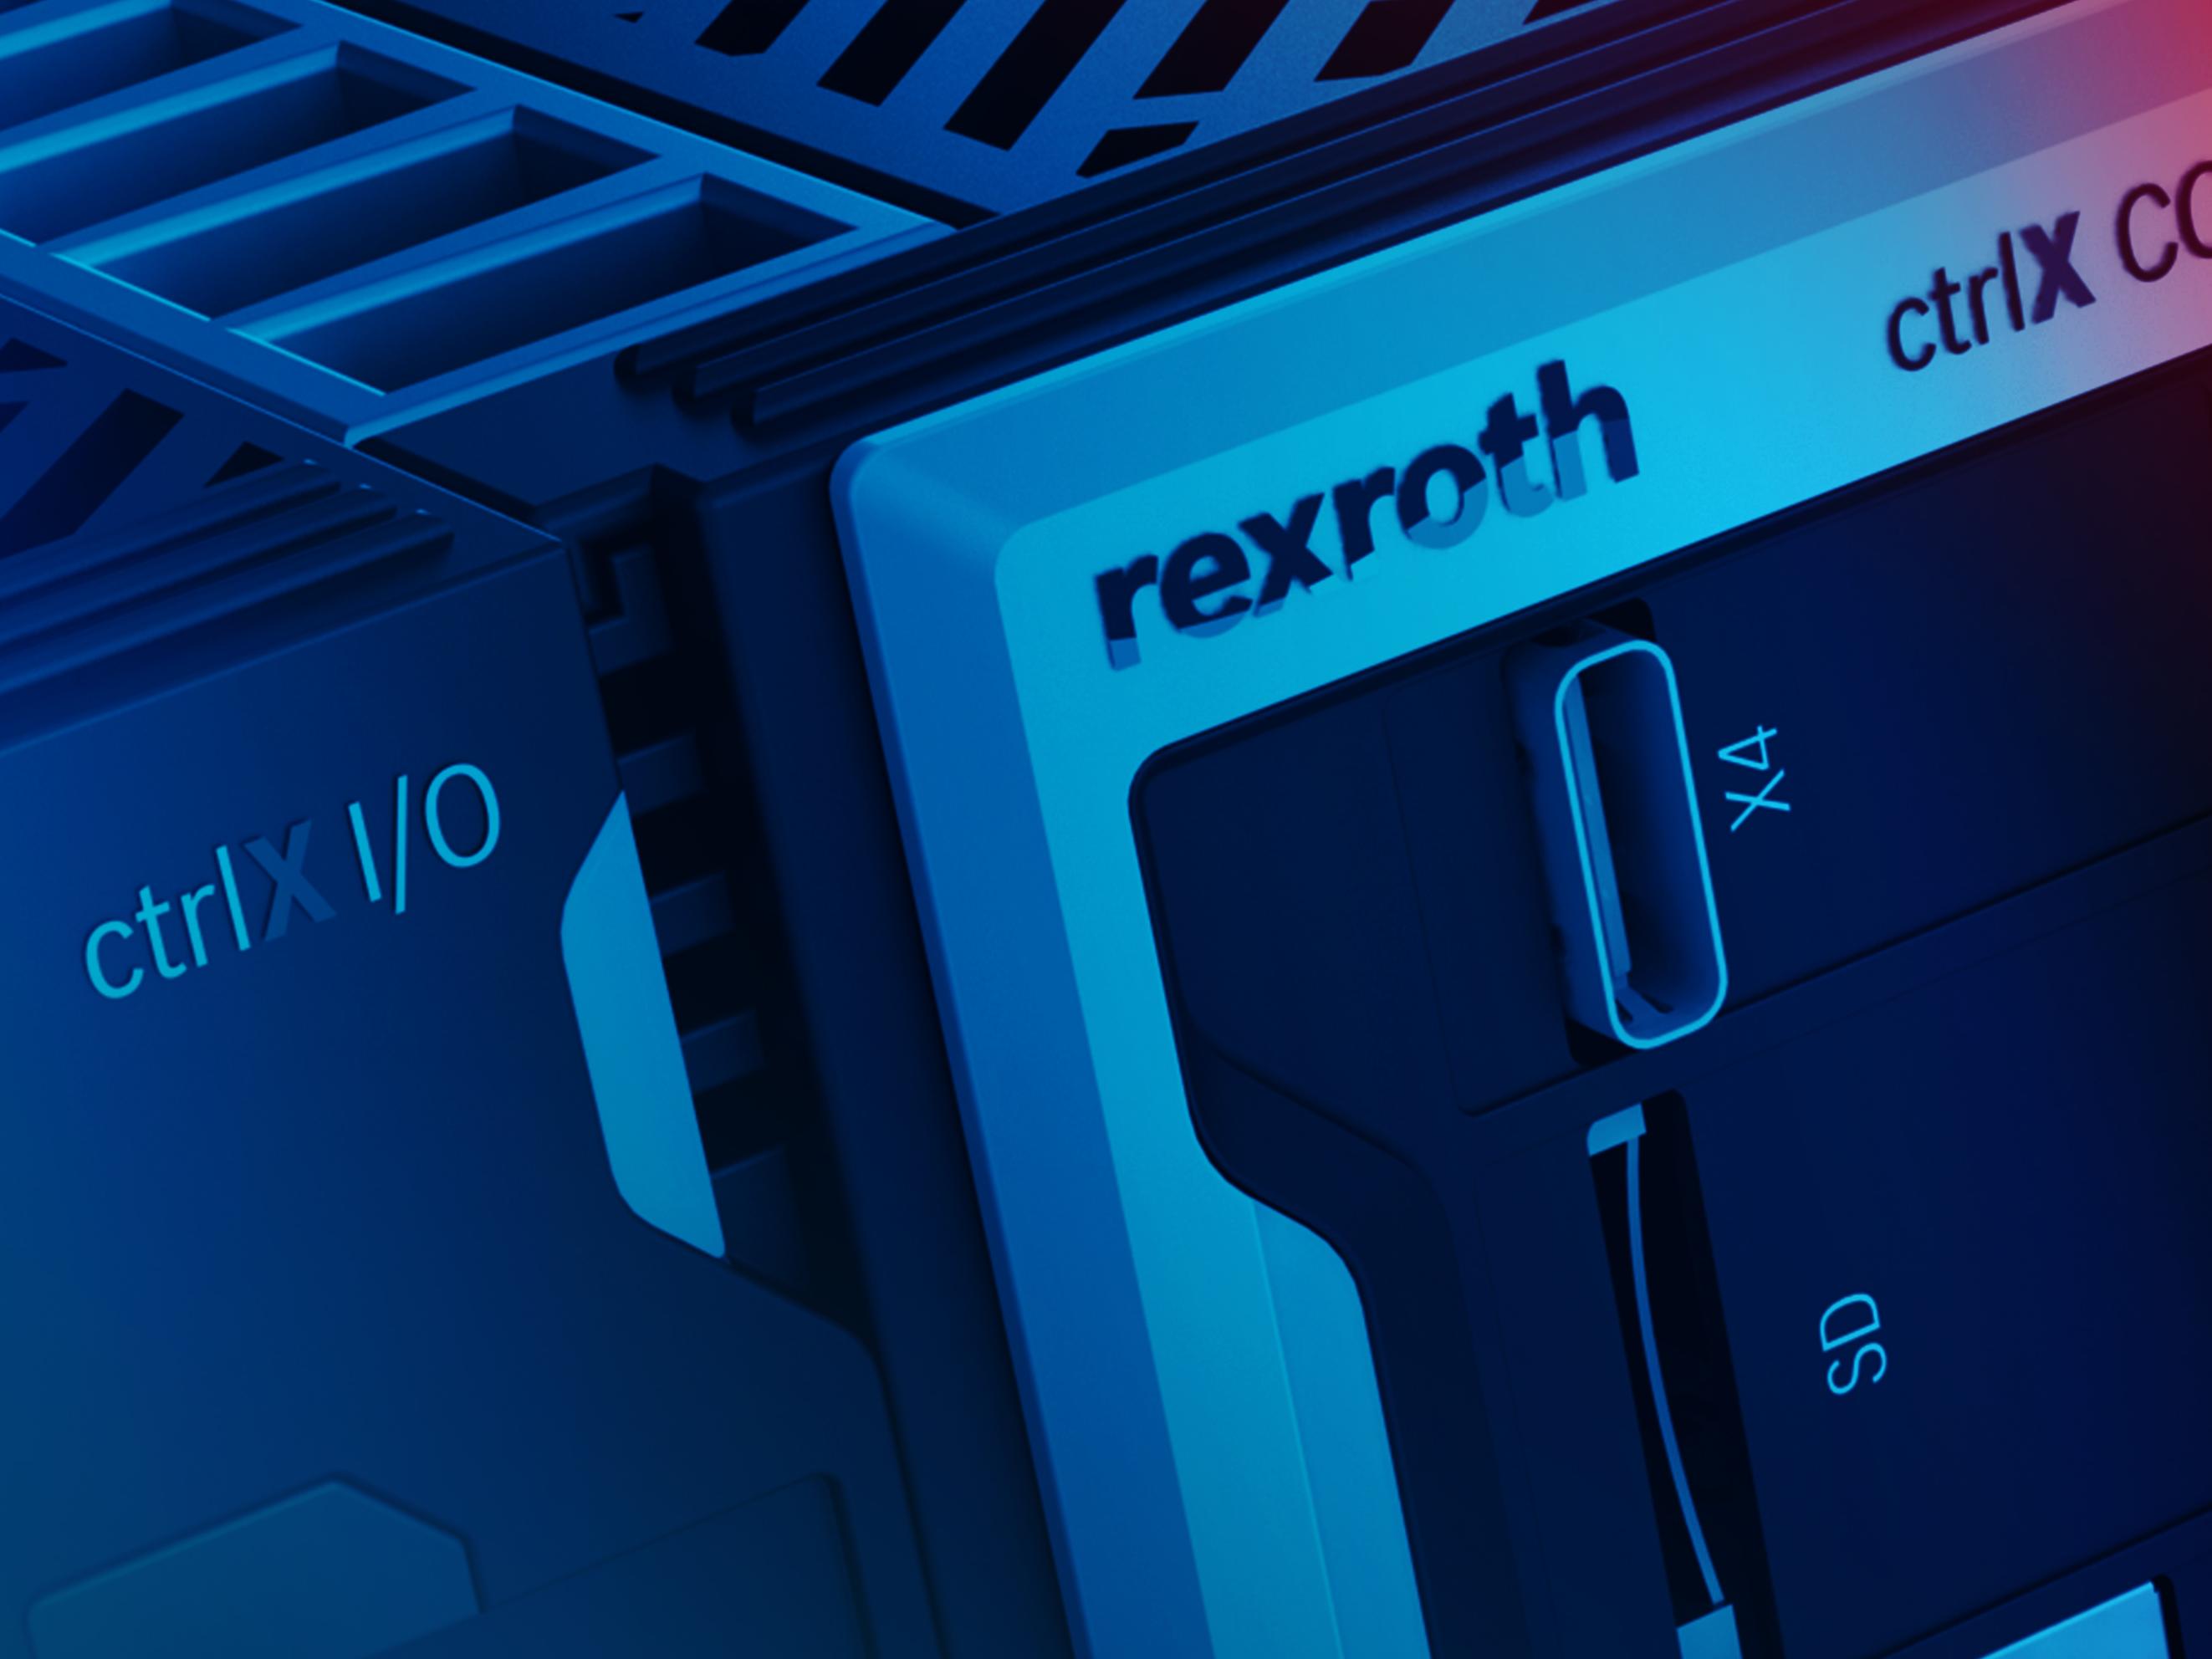 Two steps ahead with ctrlX AUTOMATION from Bosch Rexroth
